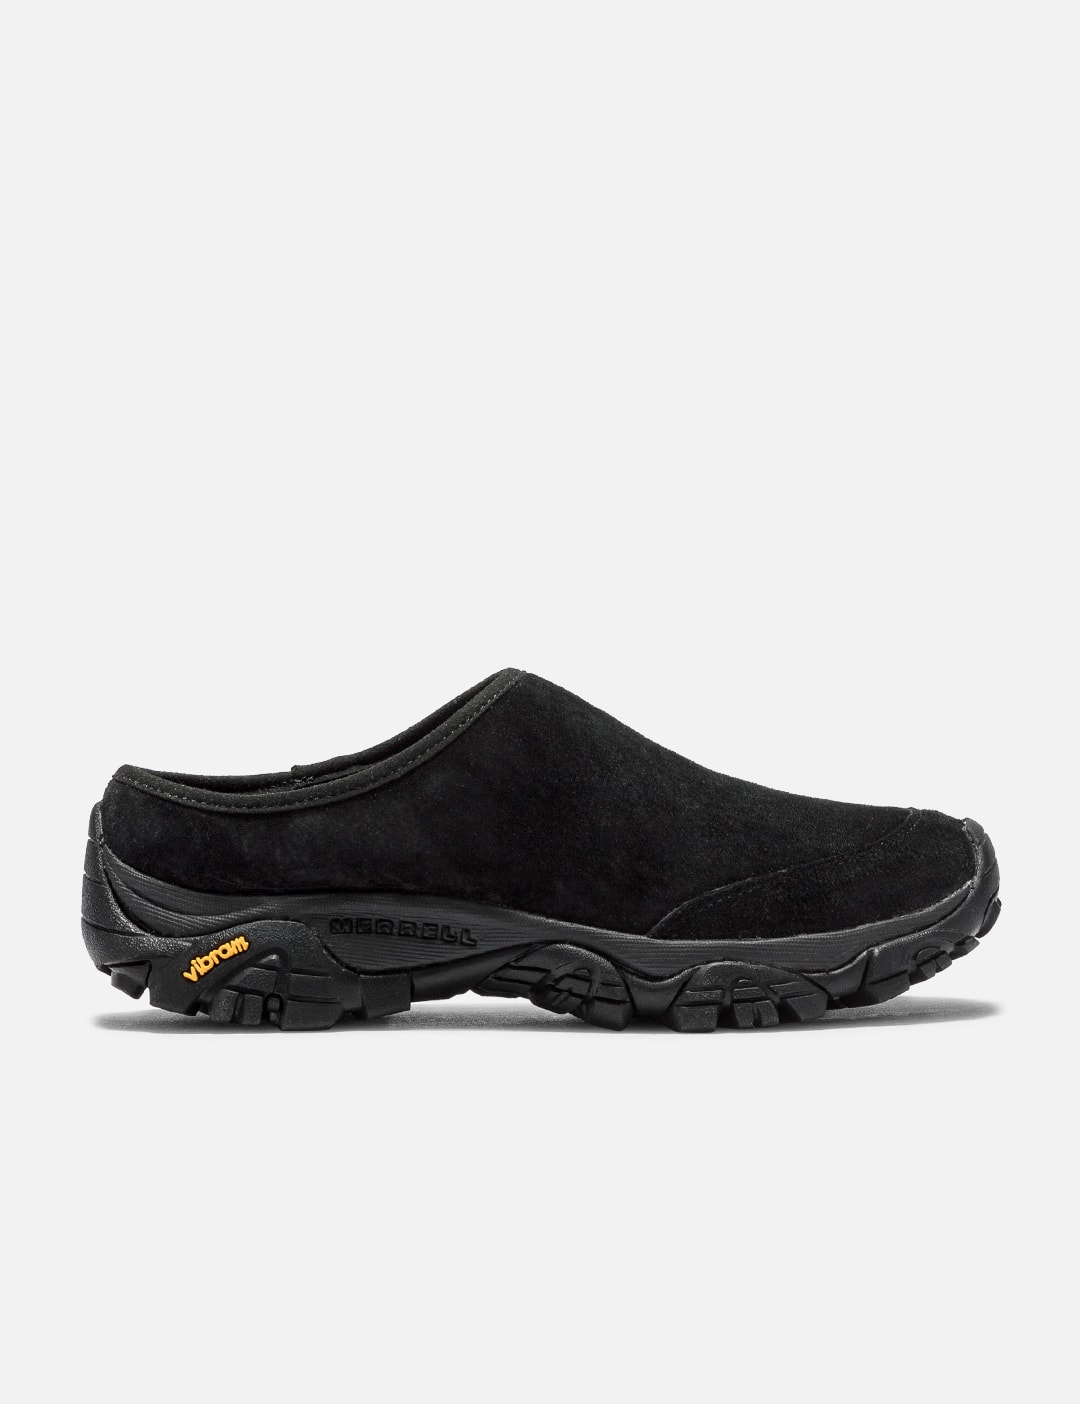 Merrell 1TRL - MOAB RETRO SLIDE 1TRL | HBX - Globally Curated Fashion and Lifestyle Hypebeast